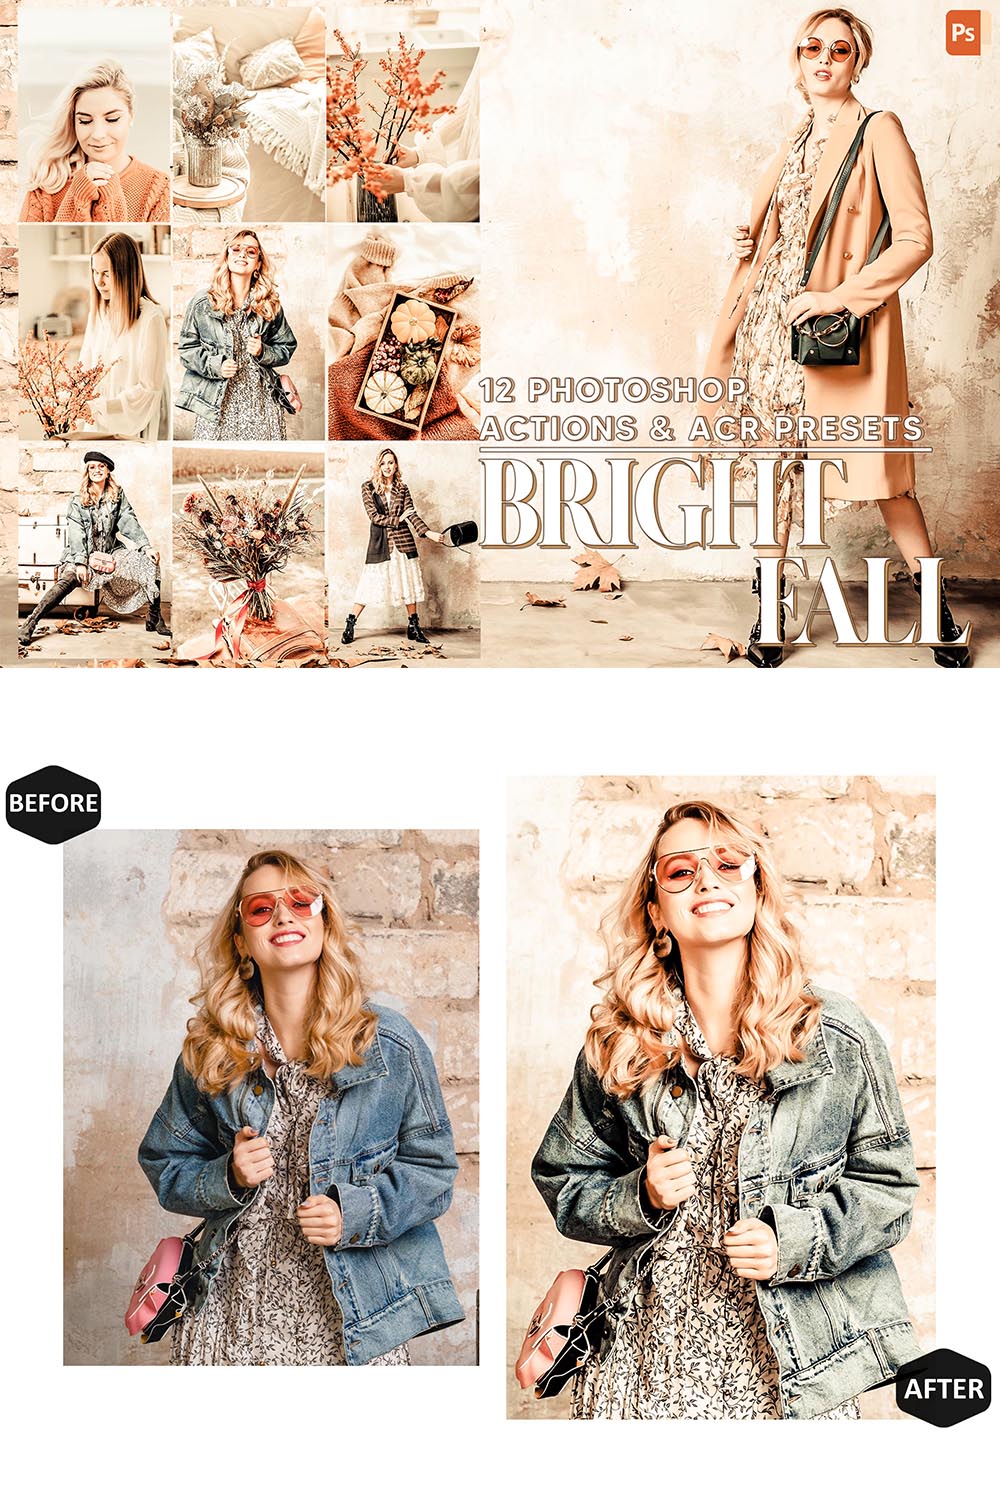 12 Photoshop Actions, Bright Fall Ps Action, Autumn ACR Preset, Orangish Ps Filter, Atn Portrait And Lifestyle Theme For Instagram, Blogger pinterest preview image.